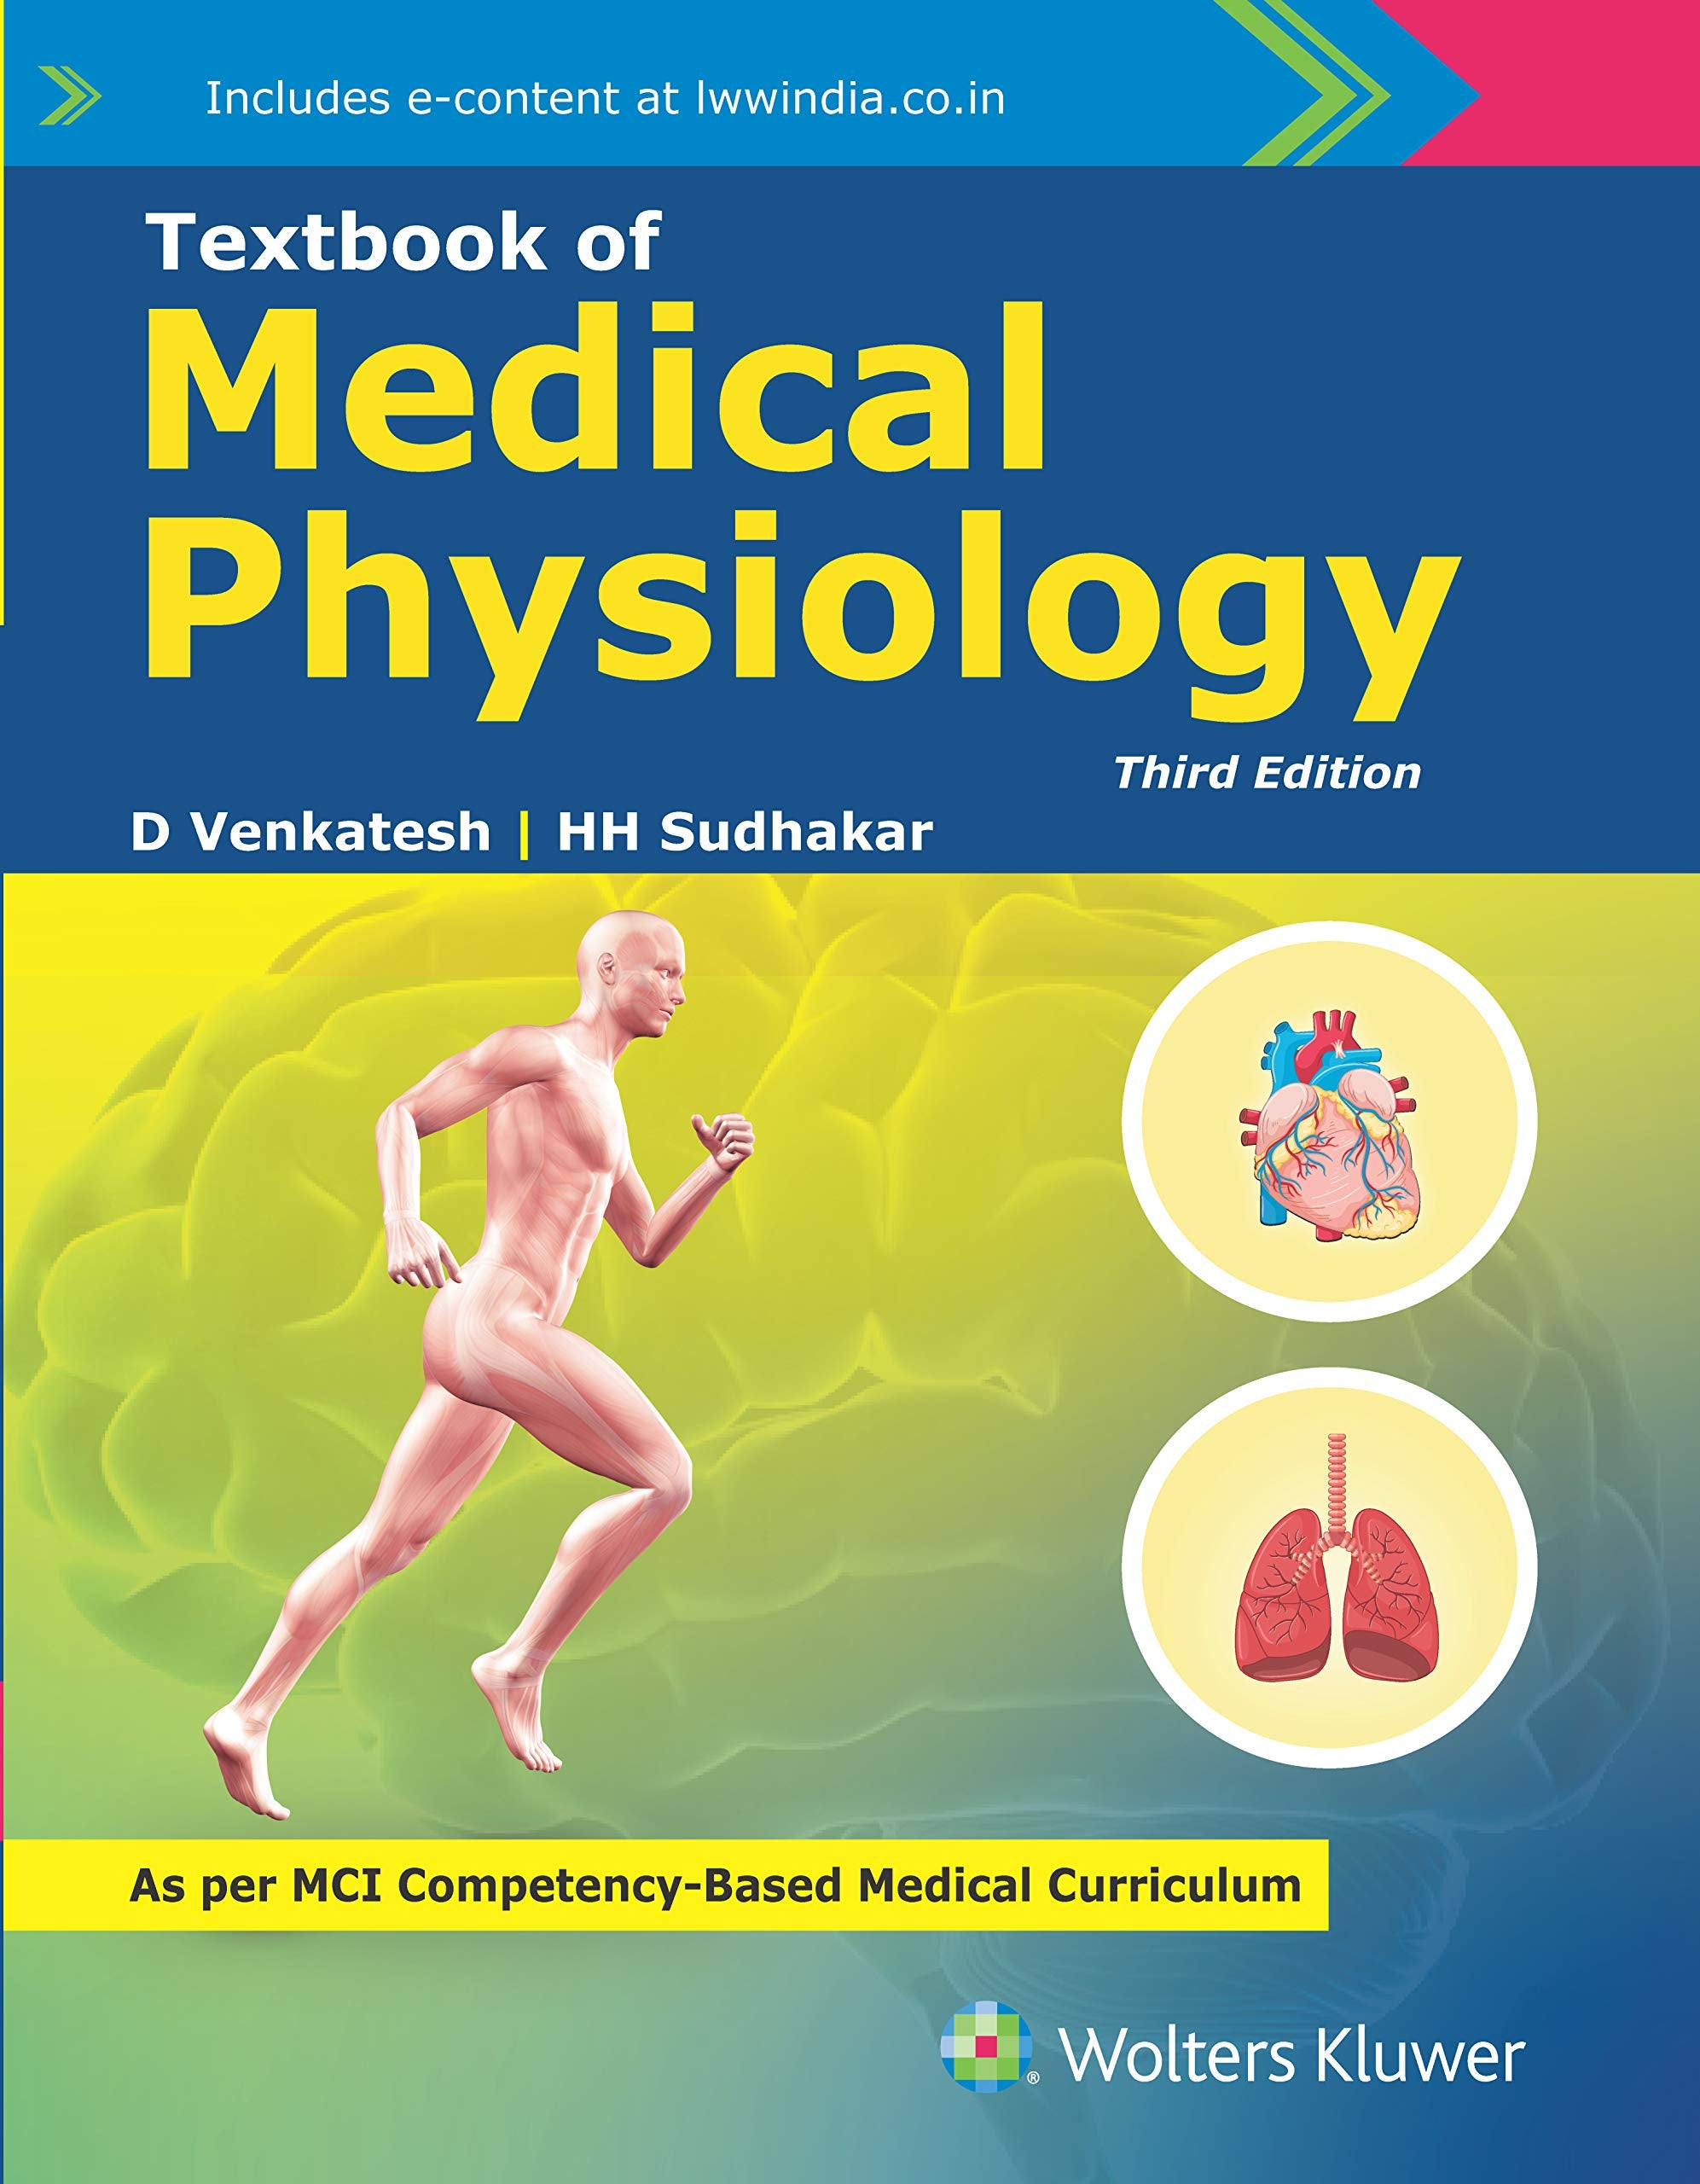 Textbook of Medical Physiology, 3/e by Venkatesh